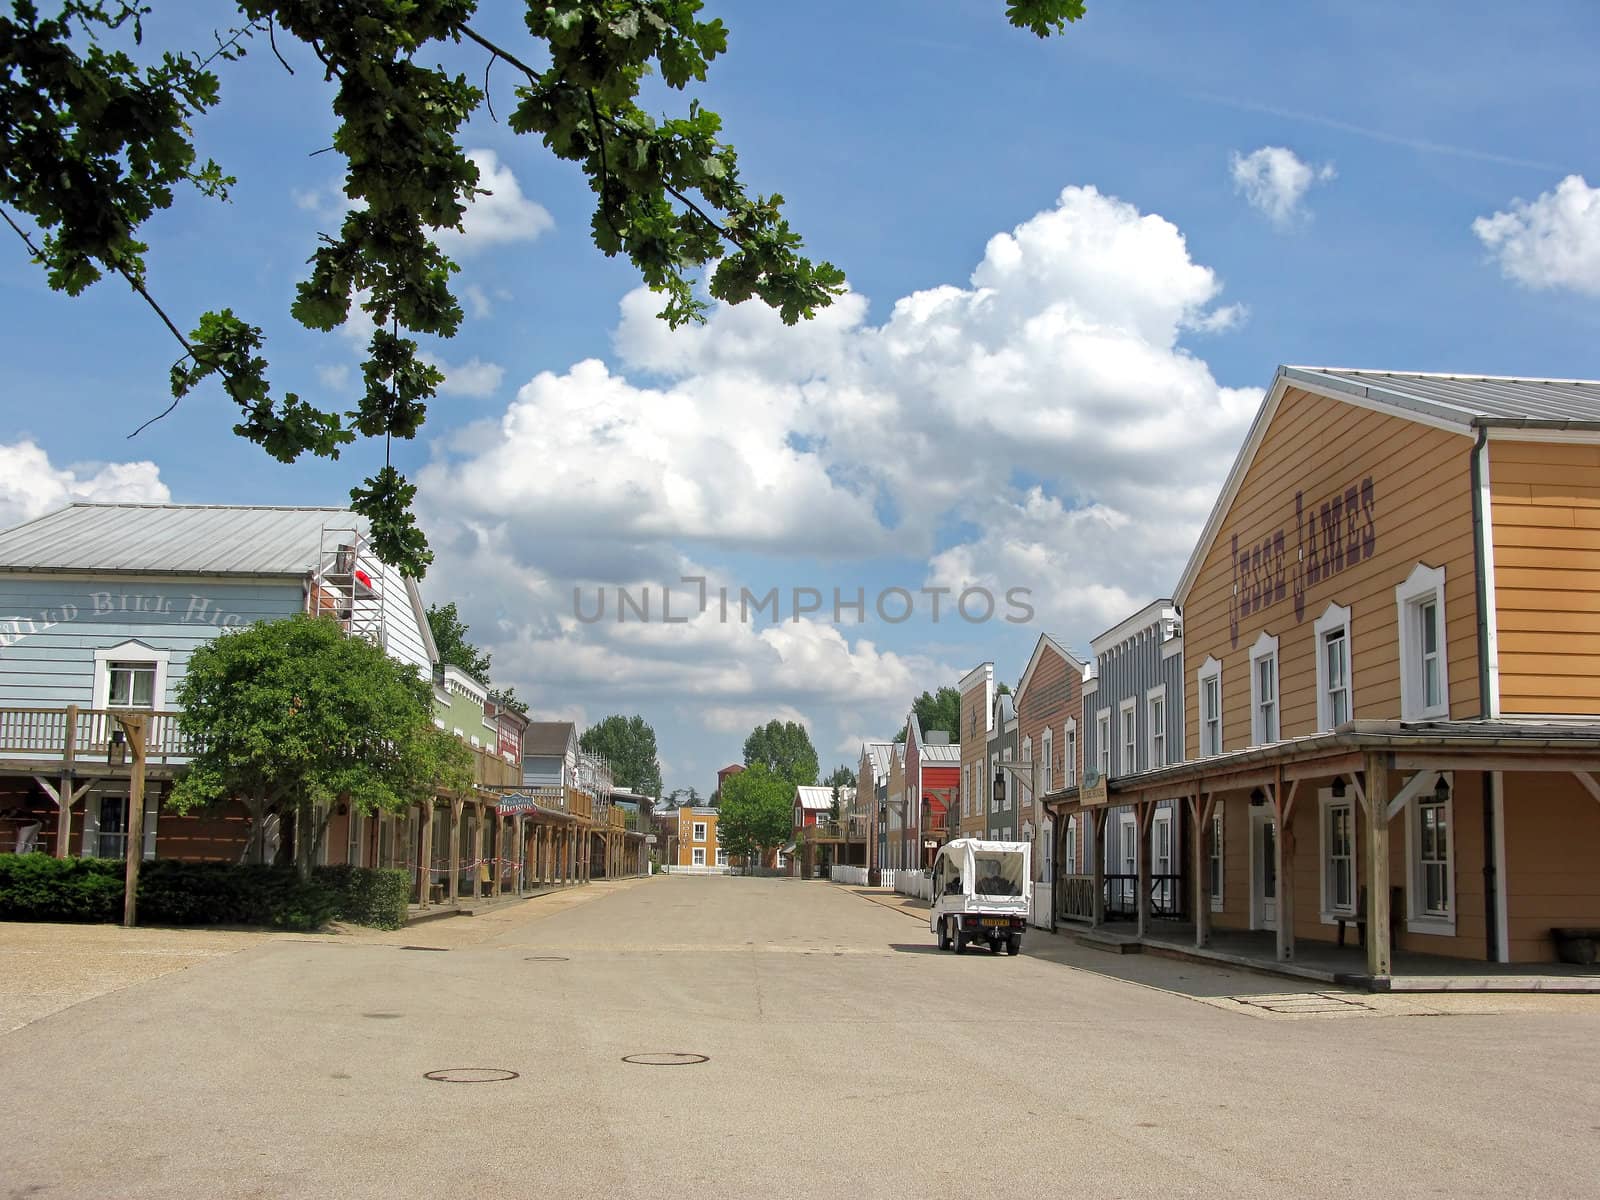 A deserted cowboy town, with wooden buildings.